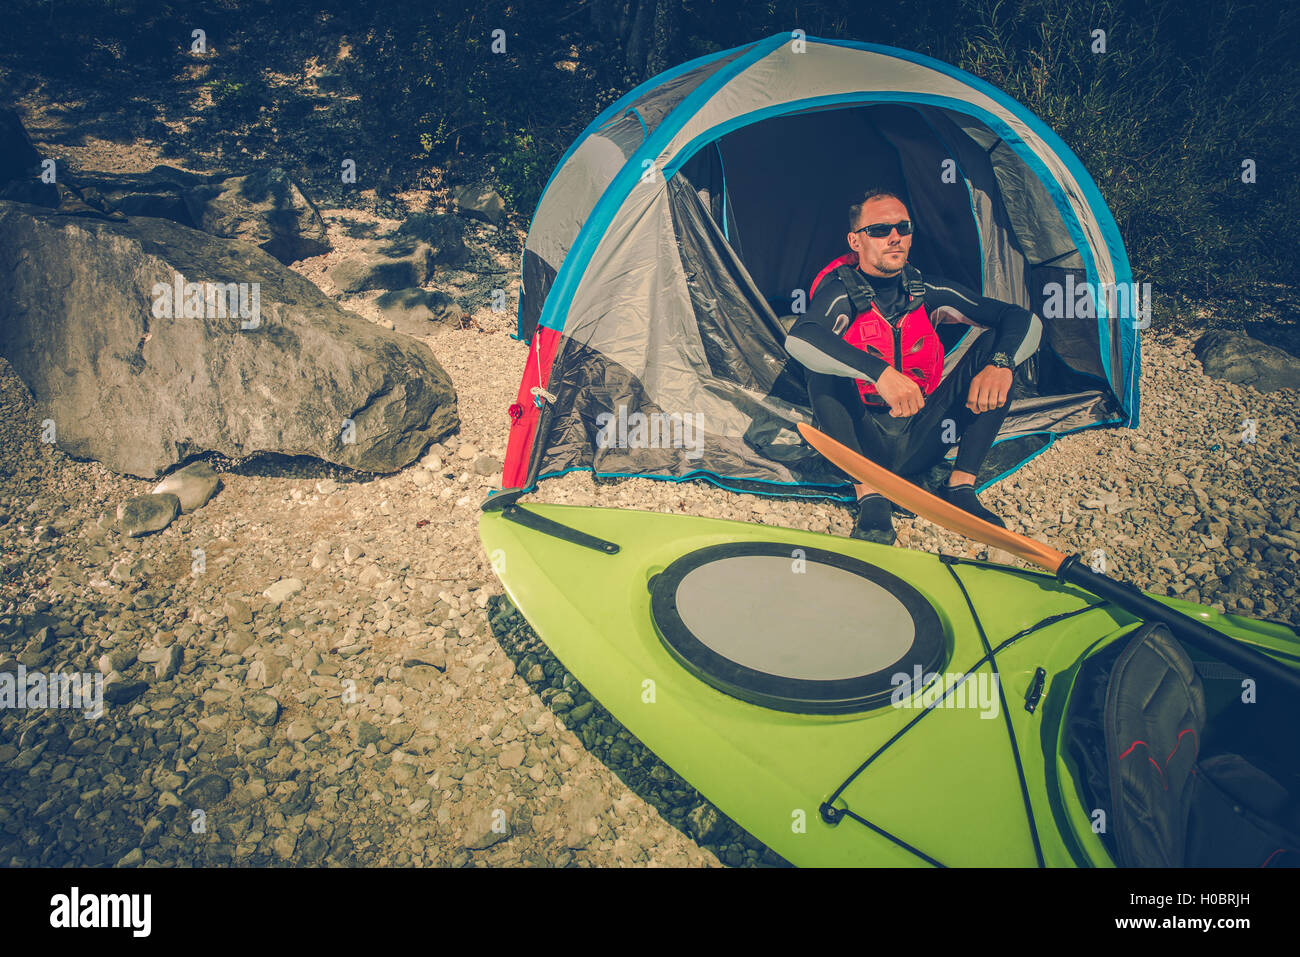 Lake Shore Camping Place. Men Camping on the Lake Shore and Taking Kayak Trips. Outdoor Lifestyle. Stock Photo